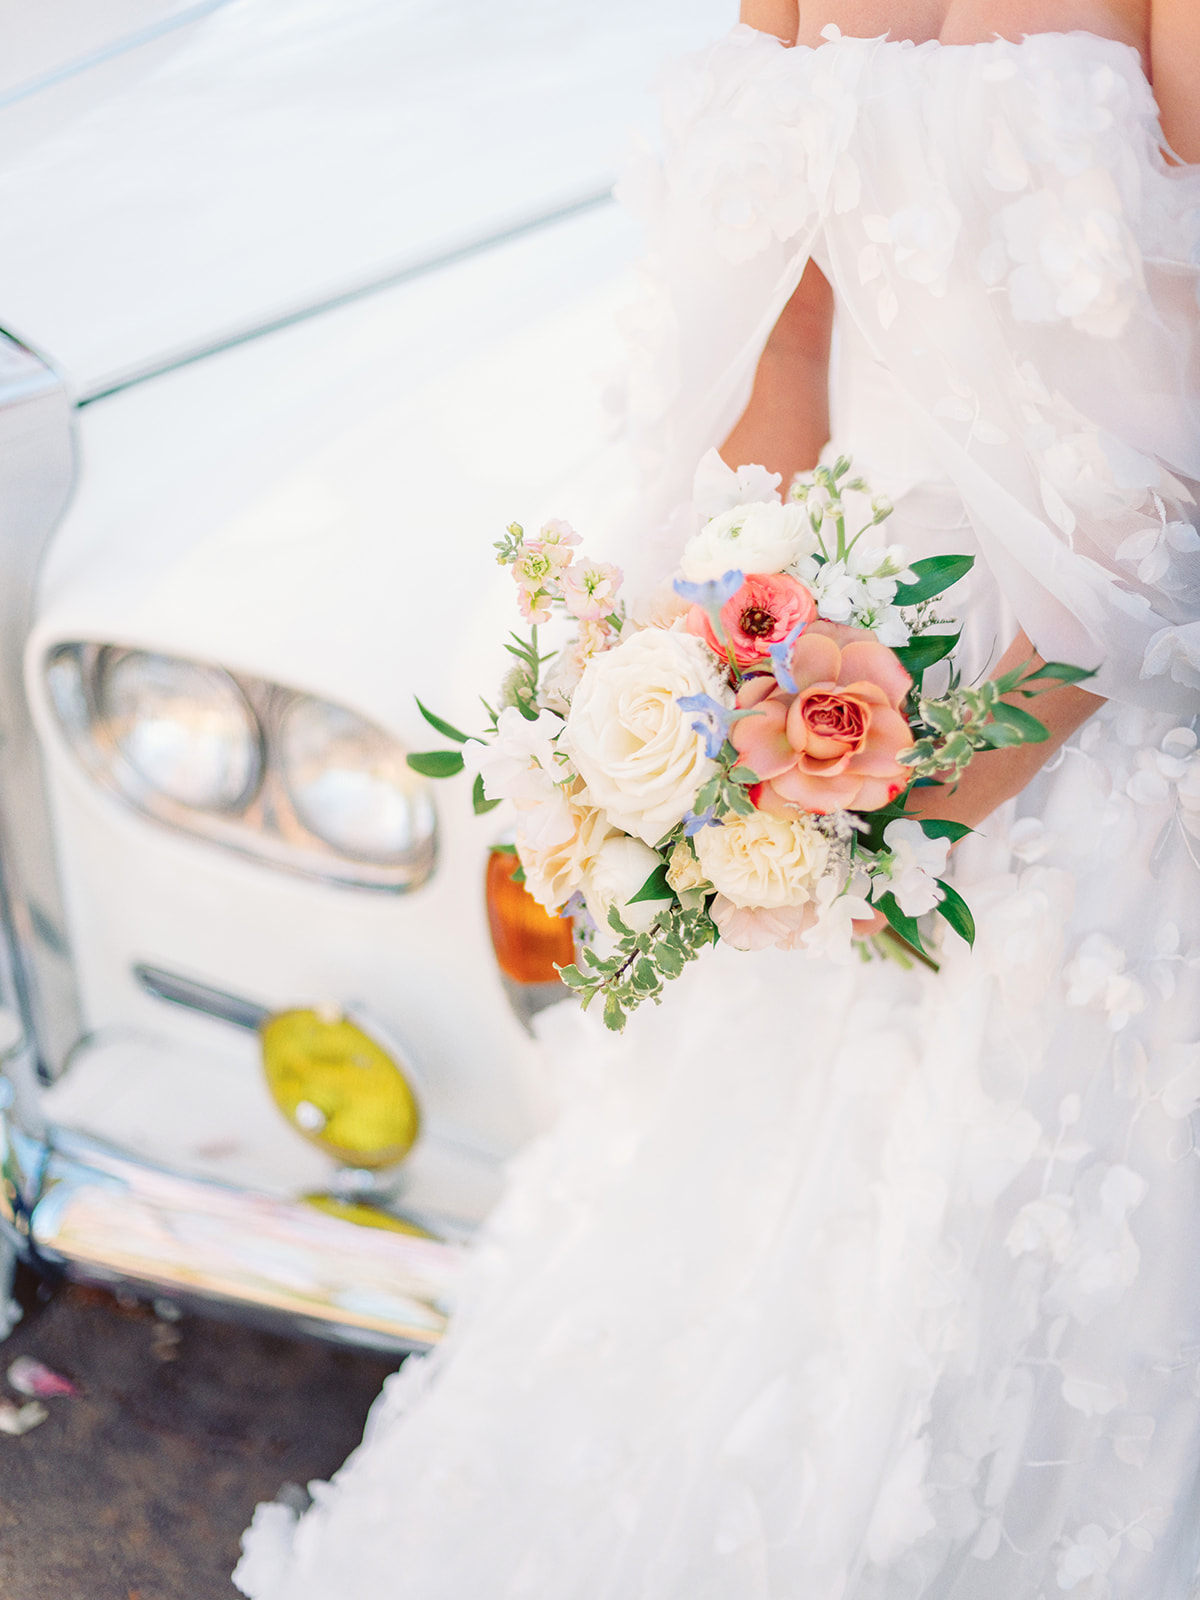 Bride's bouqet with a classic rolls-royce car